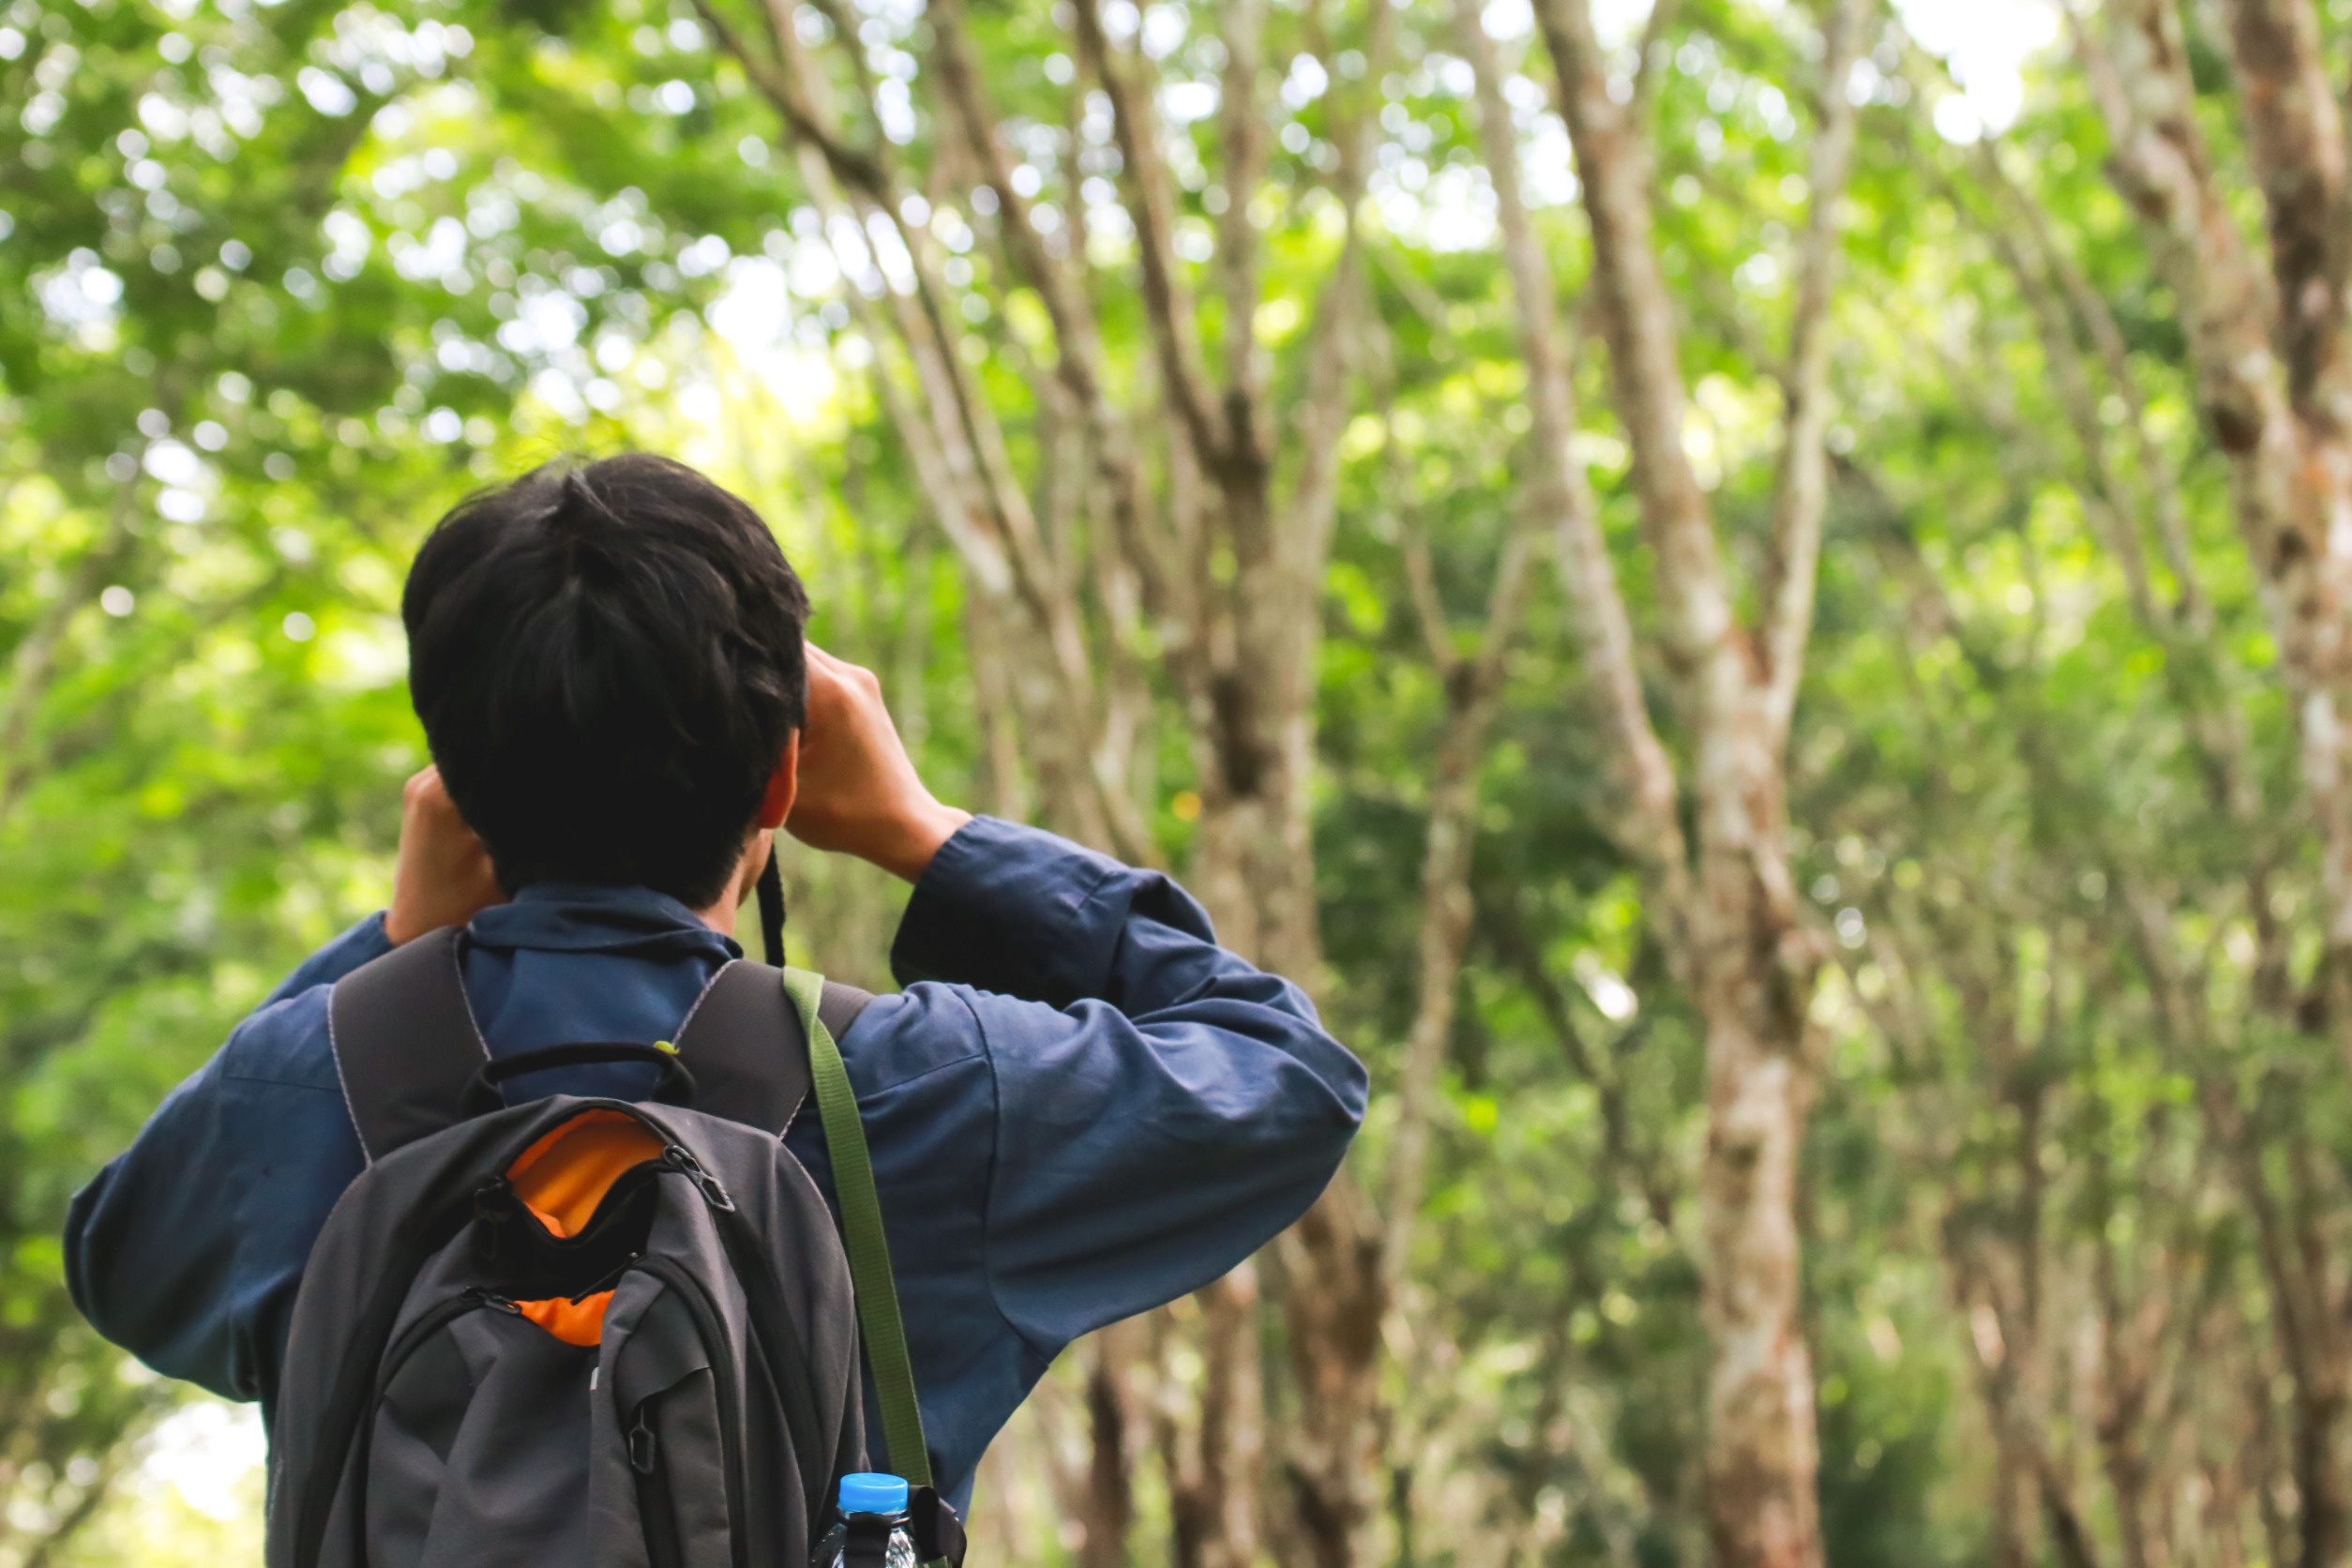 Person birdwatching with binoculars in a forest.